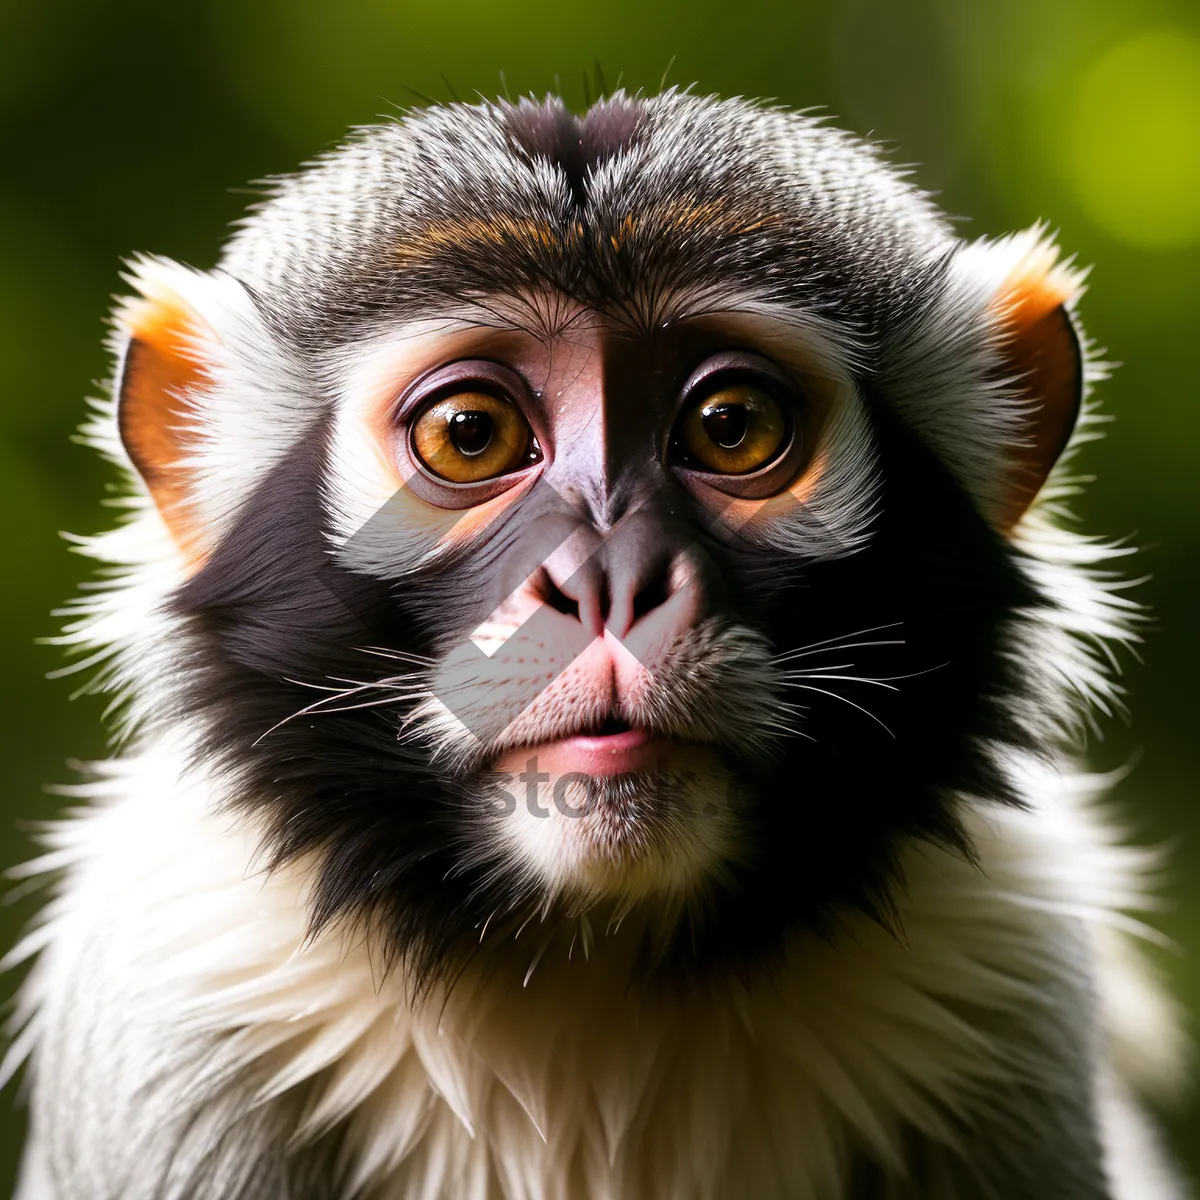 Picture of Playful Primate Glancing with Furry Charm